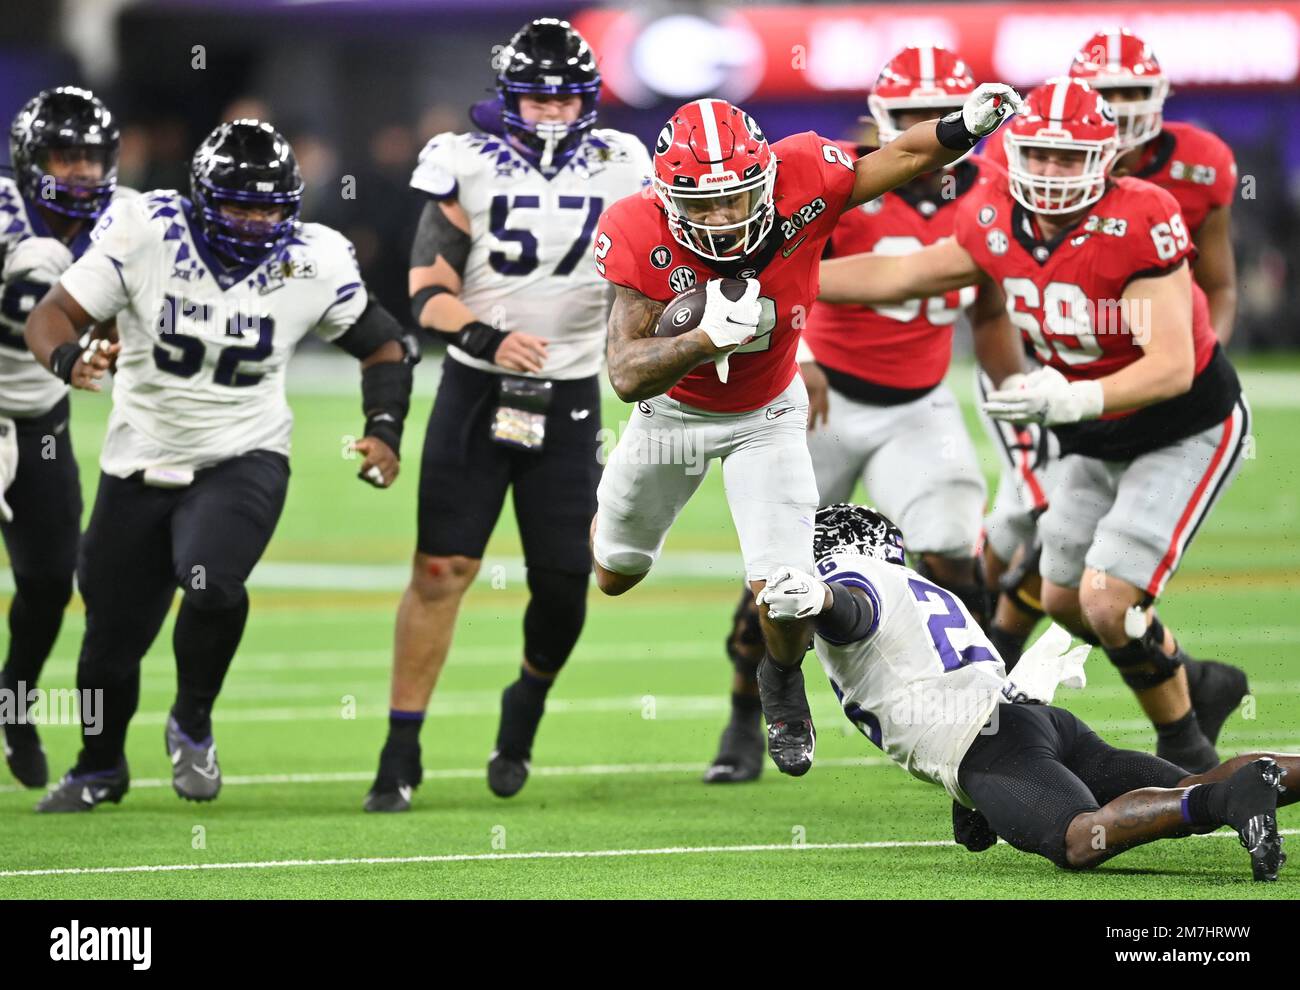 Inglewood, United States. 09th Jan, 2023. Kendall Milton #2 of the Georgia Bulldogs carries the football in the second half against the TCU Horned Frogs at the CFP National Championship game at SoFi Stadium in Inglewood, California, on Monday, January 9, 2023. Georgia defeated TCU 65-7. Photo by Mike Goulding/UPI Credit: UPI/Alamy Live News Stock Photo